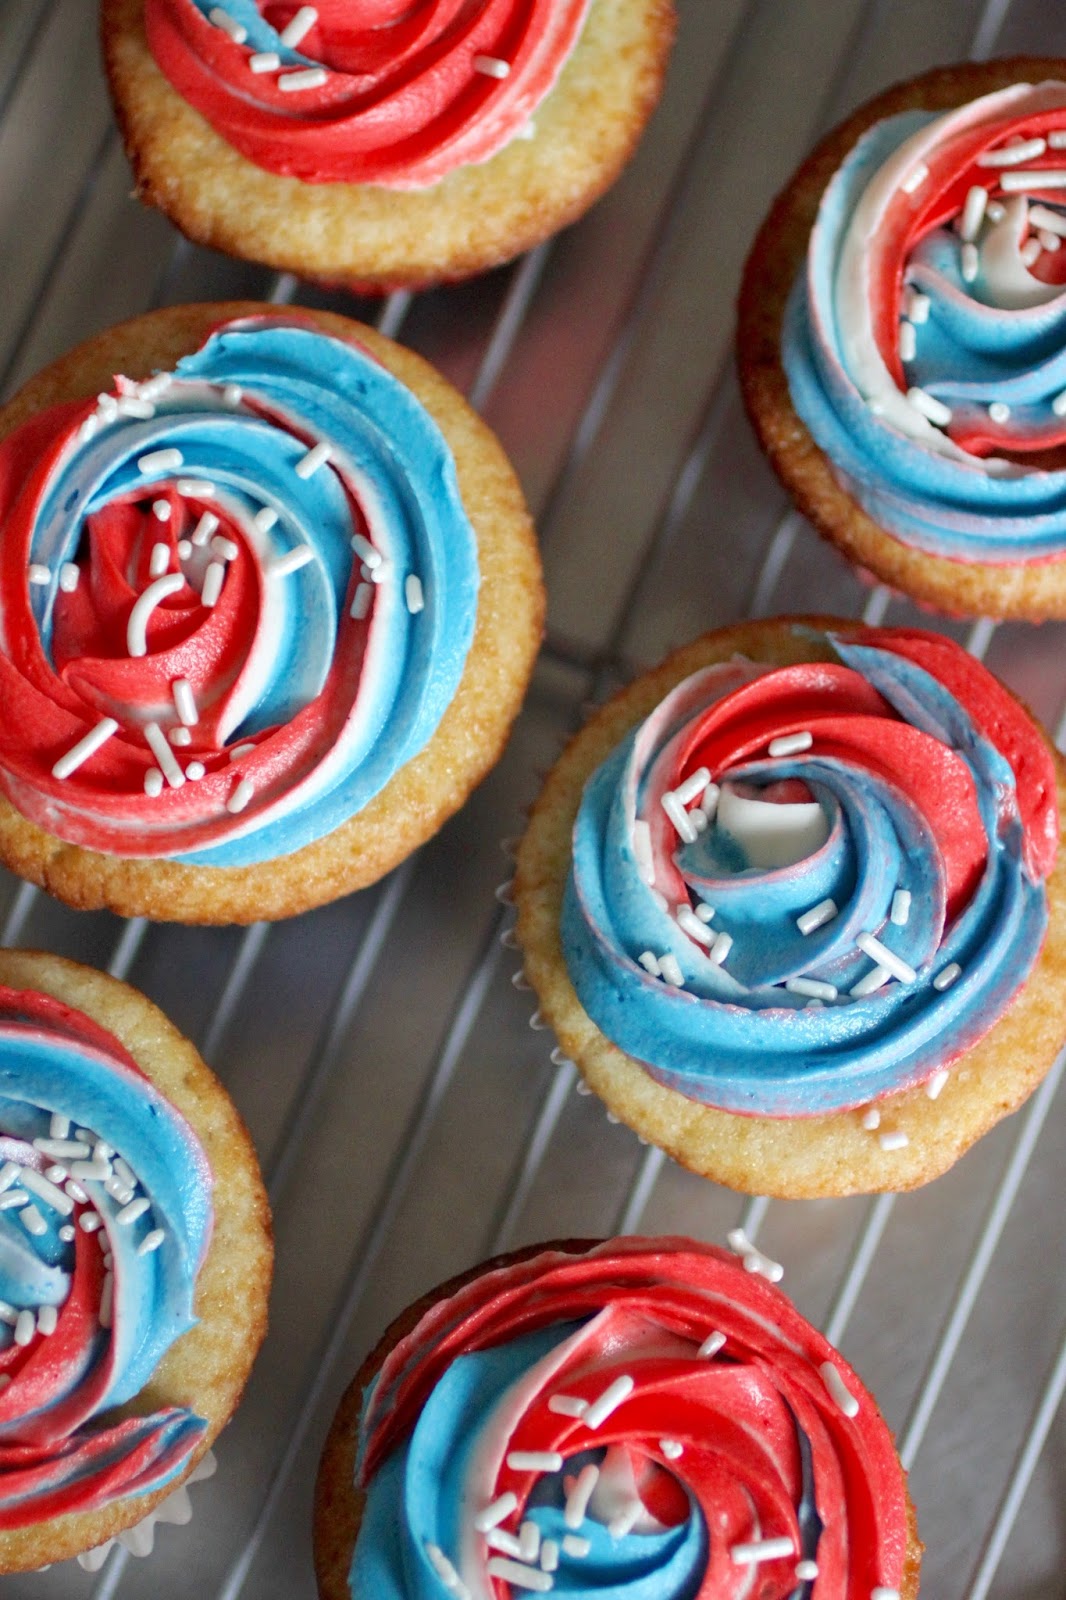 Baked Perfection: Red, White, and Blue Cupcakes